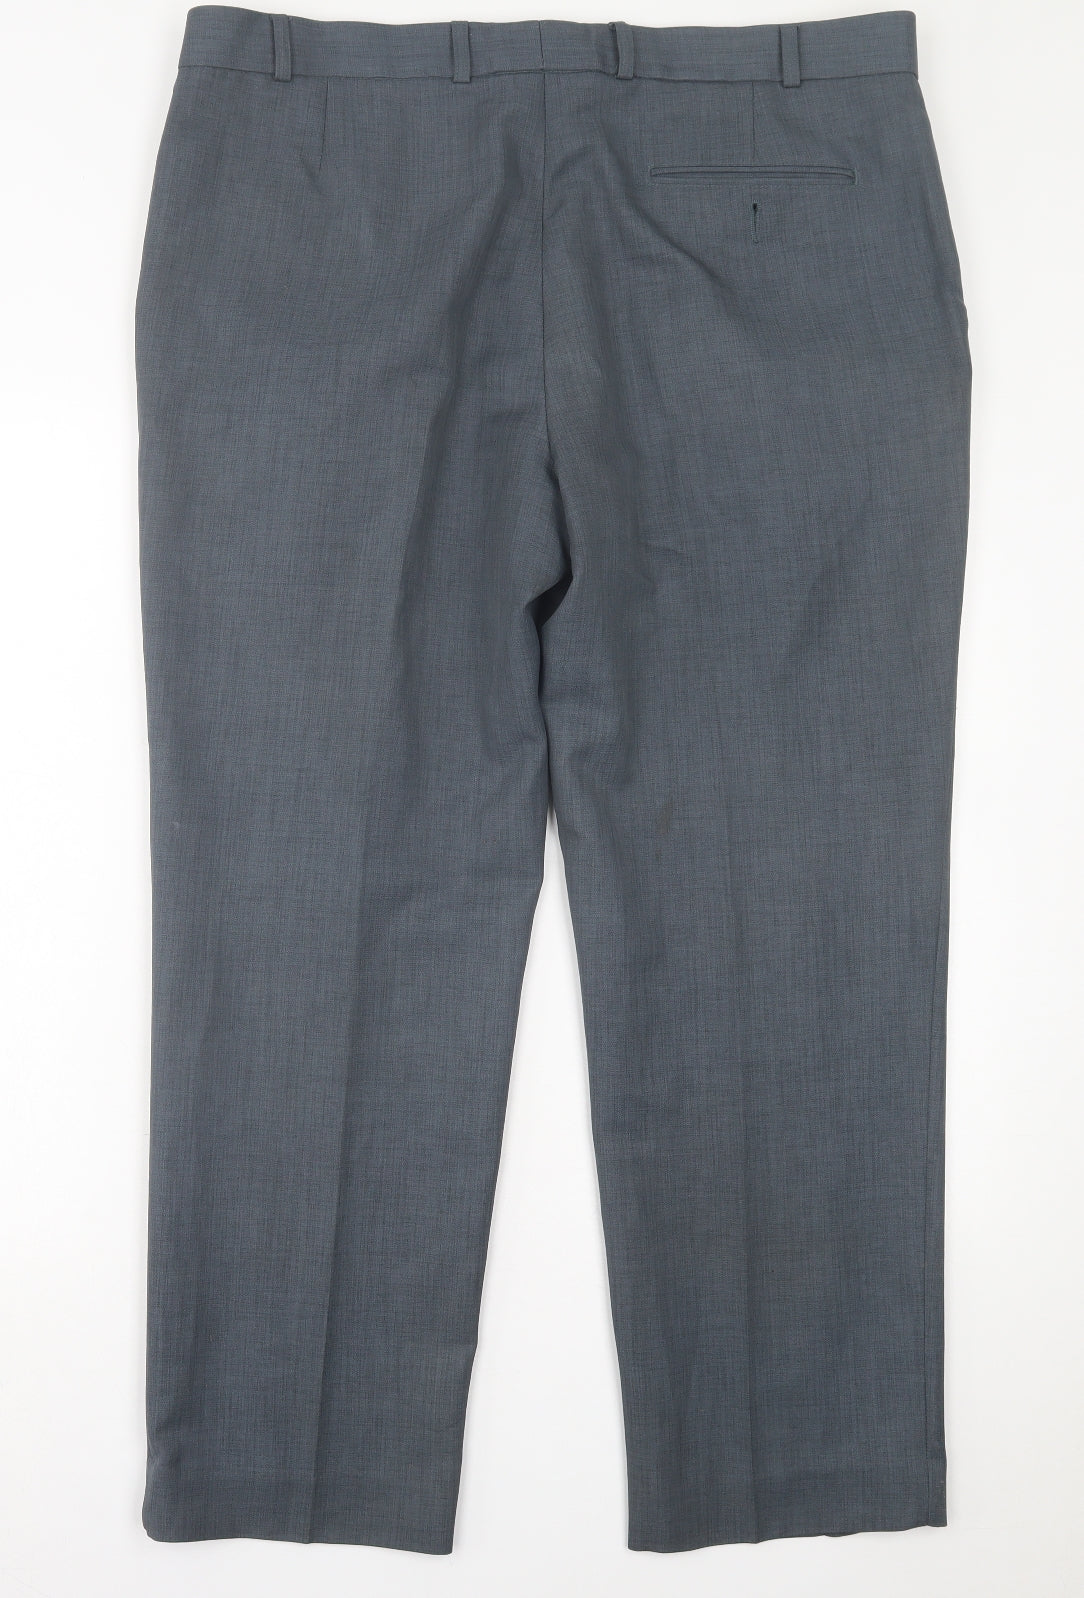 james pringle Mens Grey  Polyester Trousers  Size 40 in L29 in Regular Button